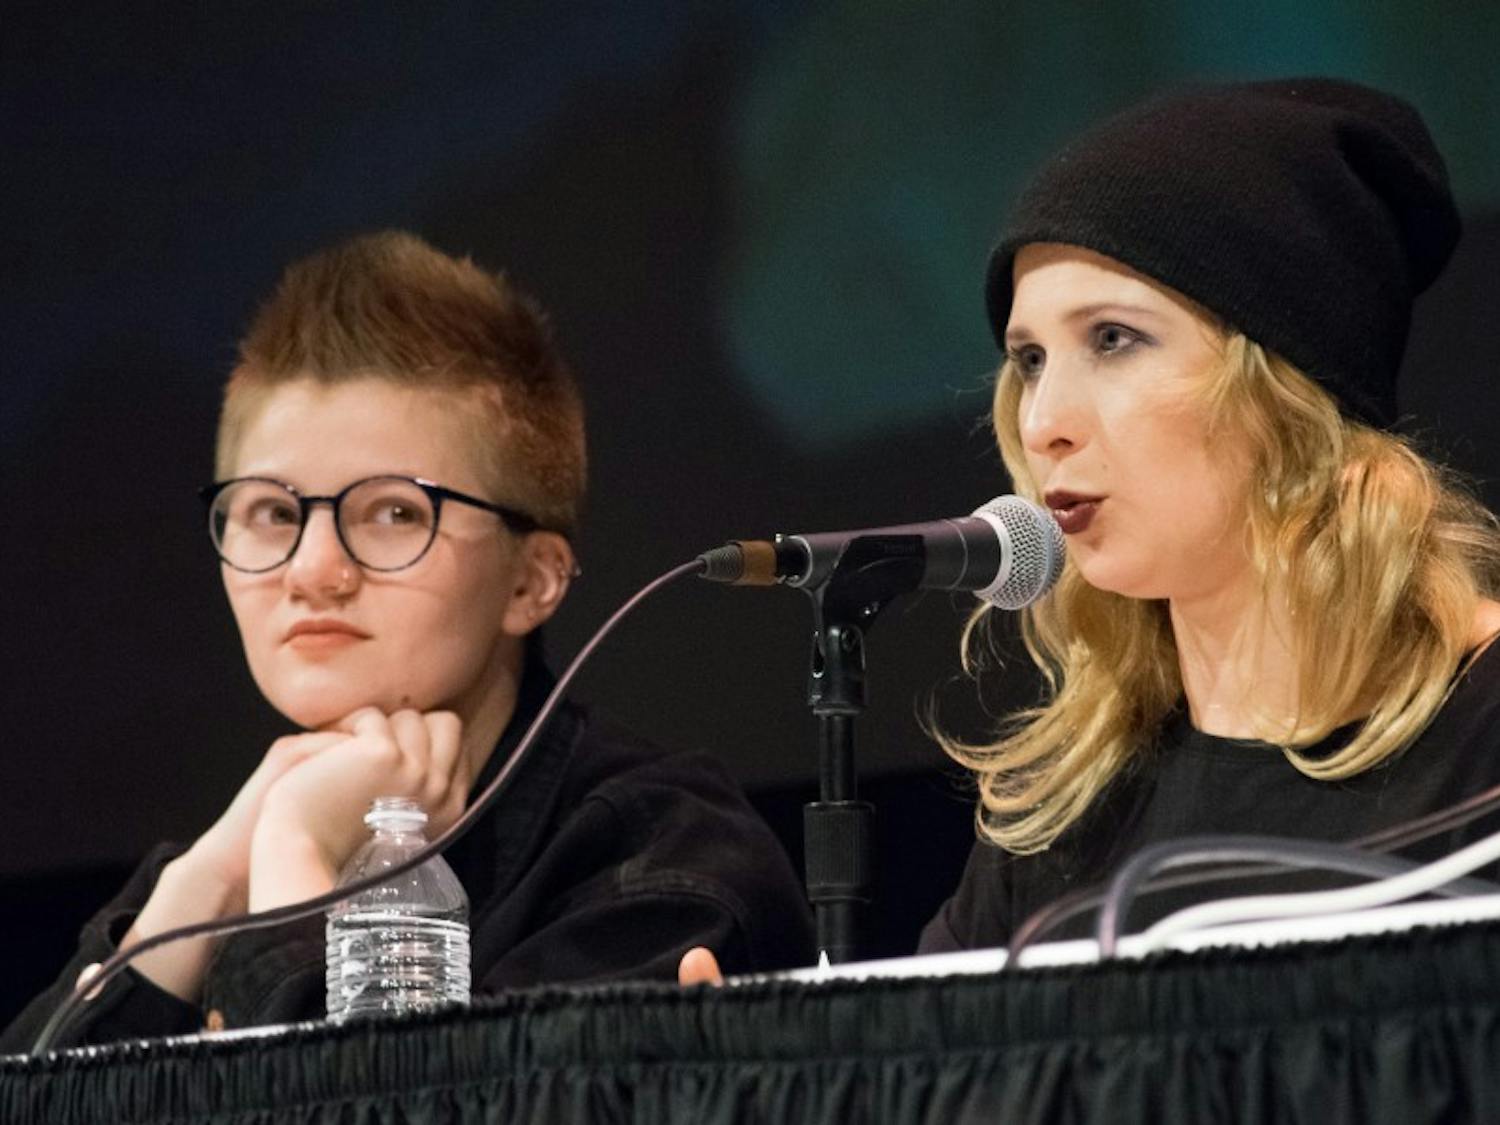 Maria (Masha) Alyokhina and Alexandra (Sasha) Bogino, members of feminist punk collective Pussy Riot, talked about their experience as political prisoners while being activists in Russia.